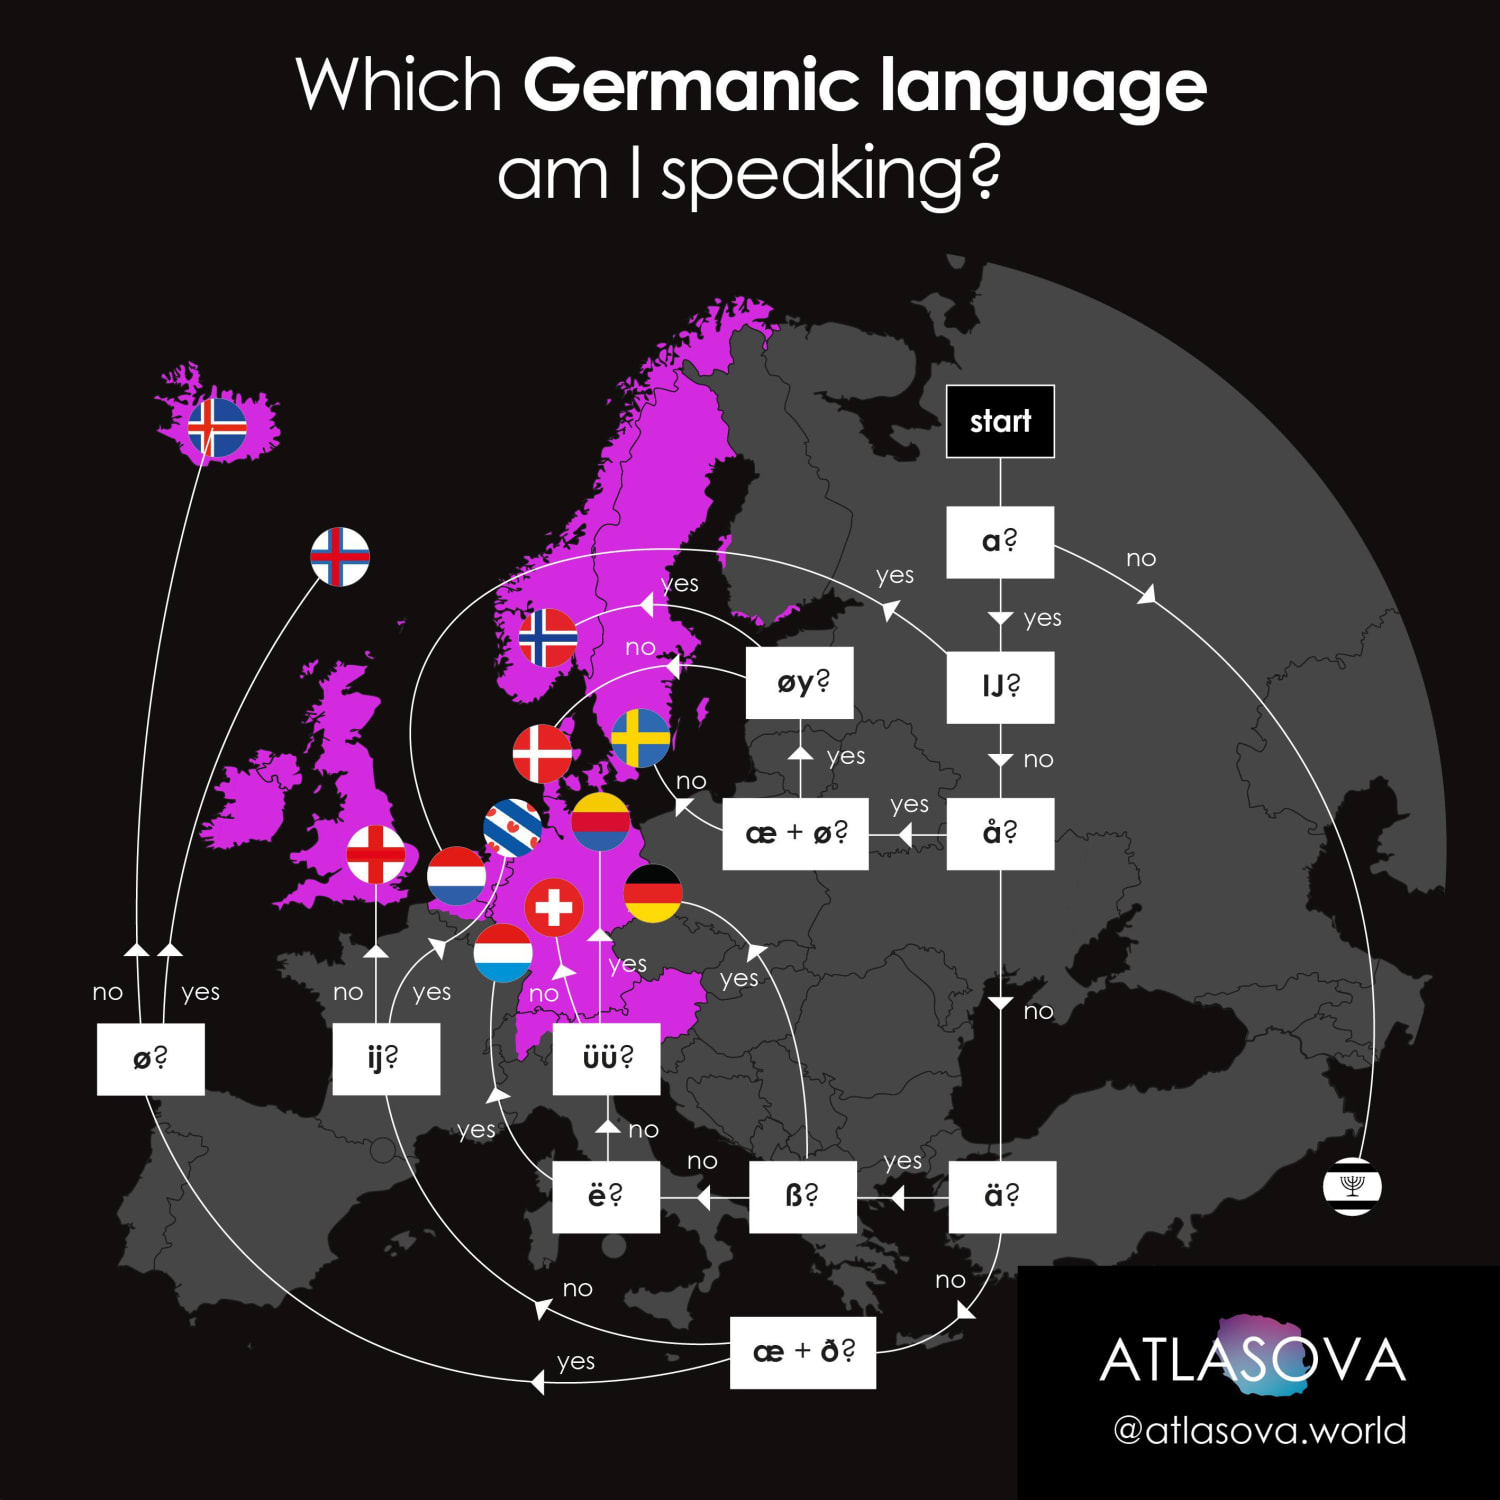 If you’re not sure which Germanic language you’re speaking, use this map